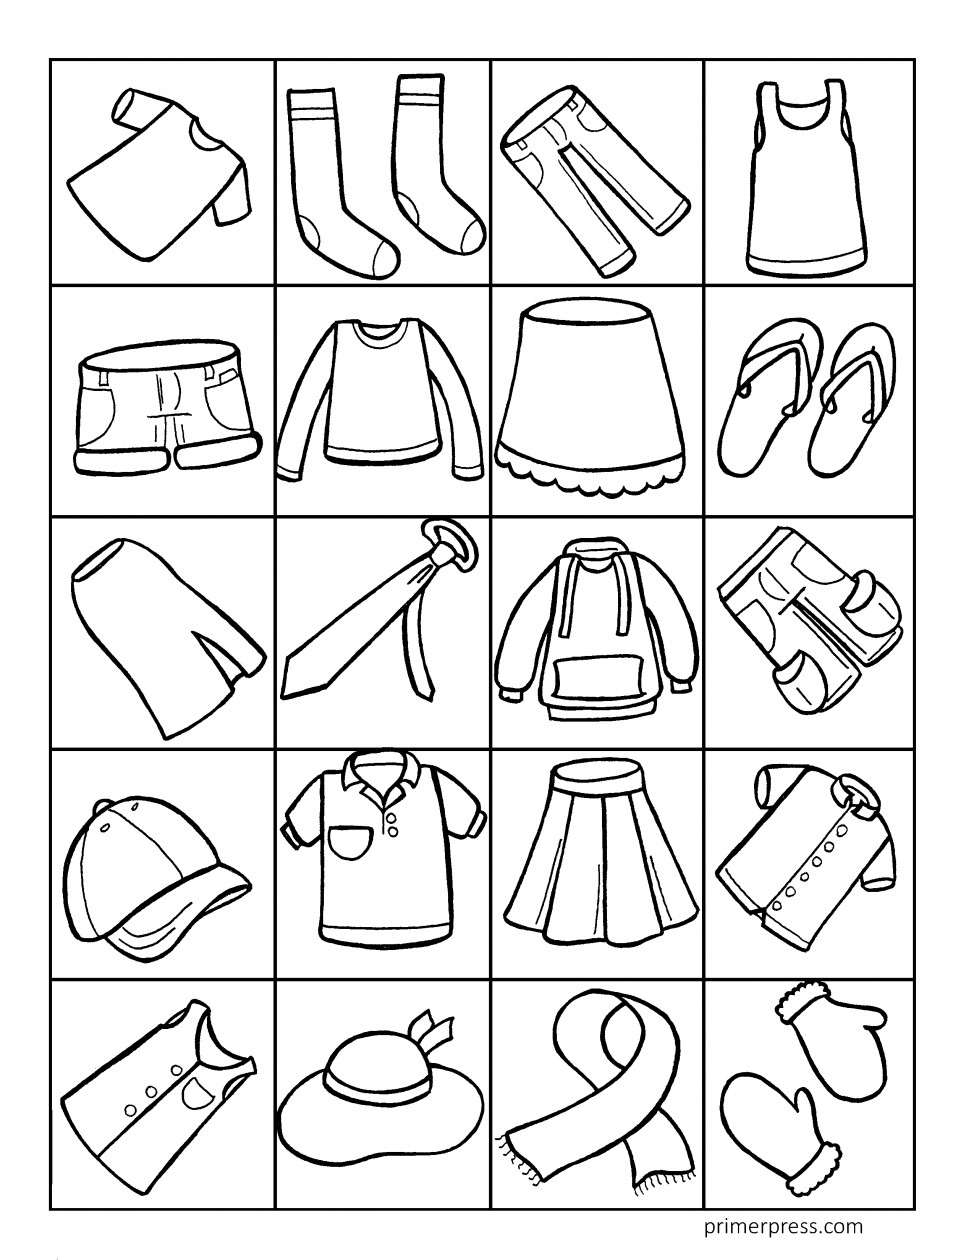 Free Coloring Sheets Of Kids Dressed In Career Clothing
 Clothing Coloring Pages for Preschoolers Collection